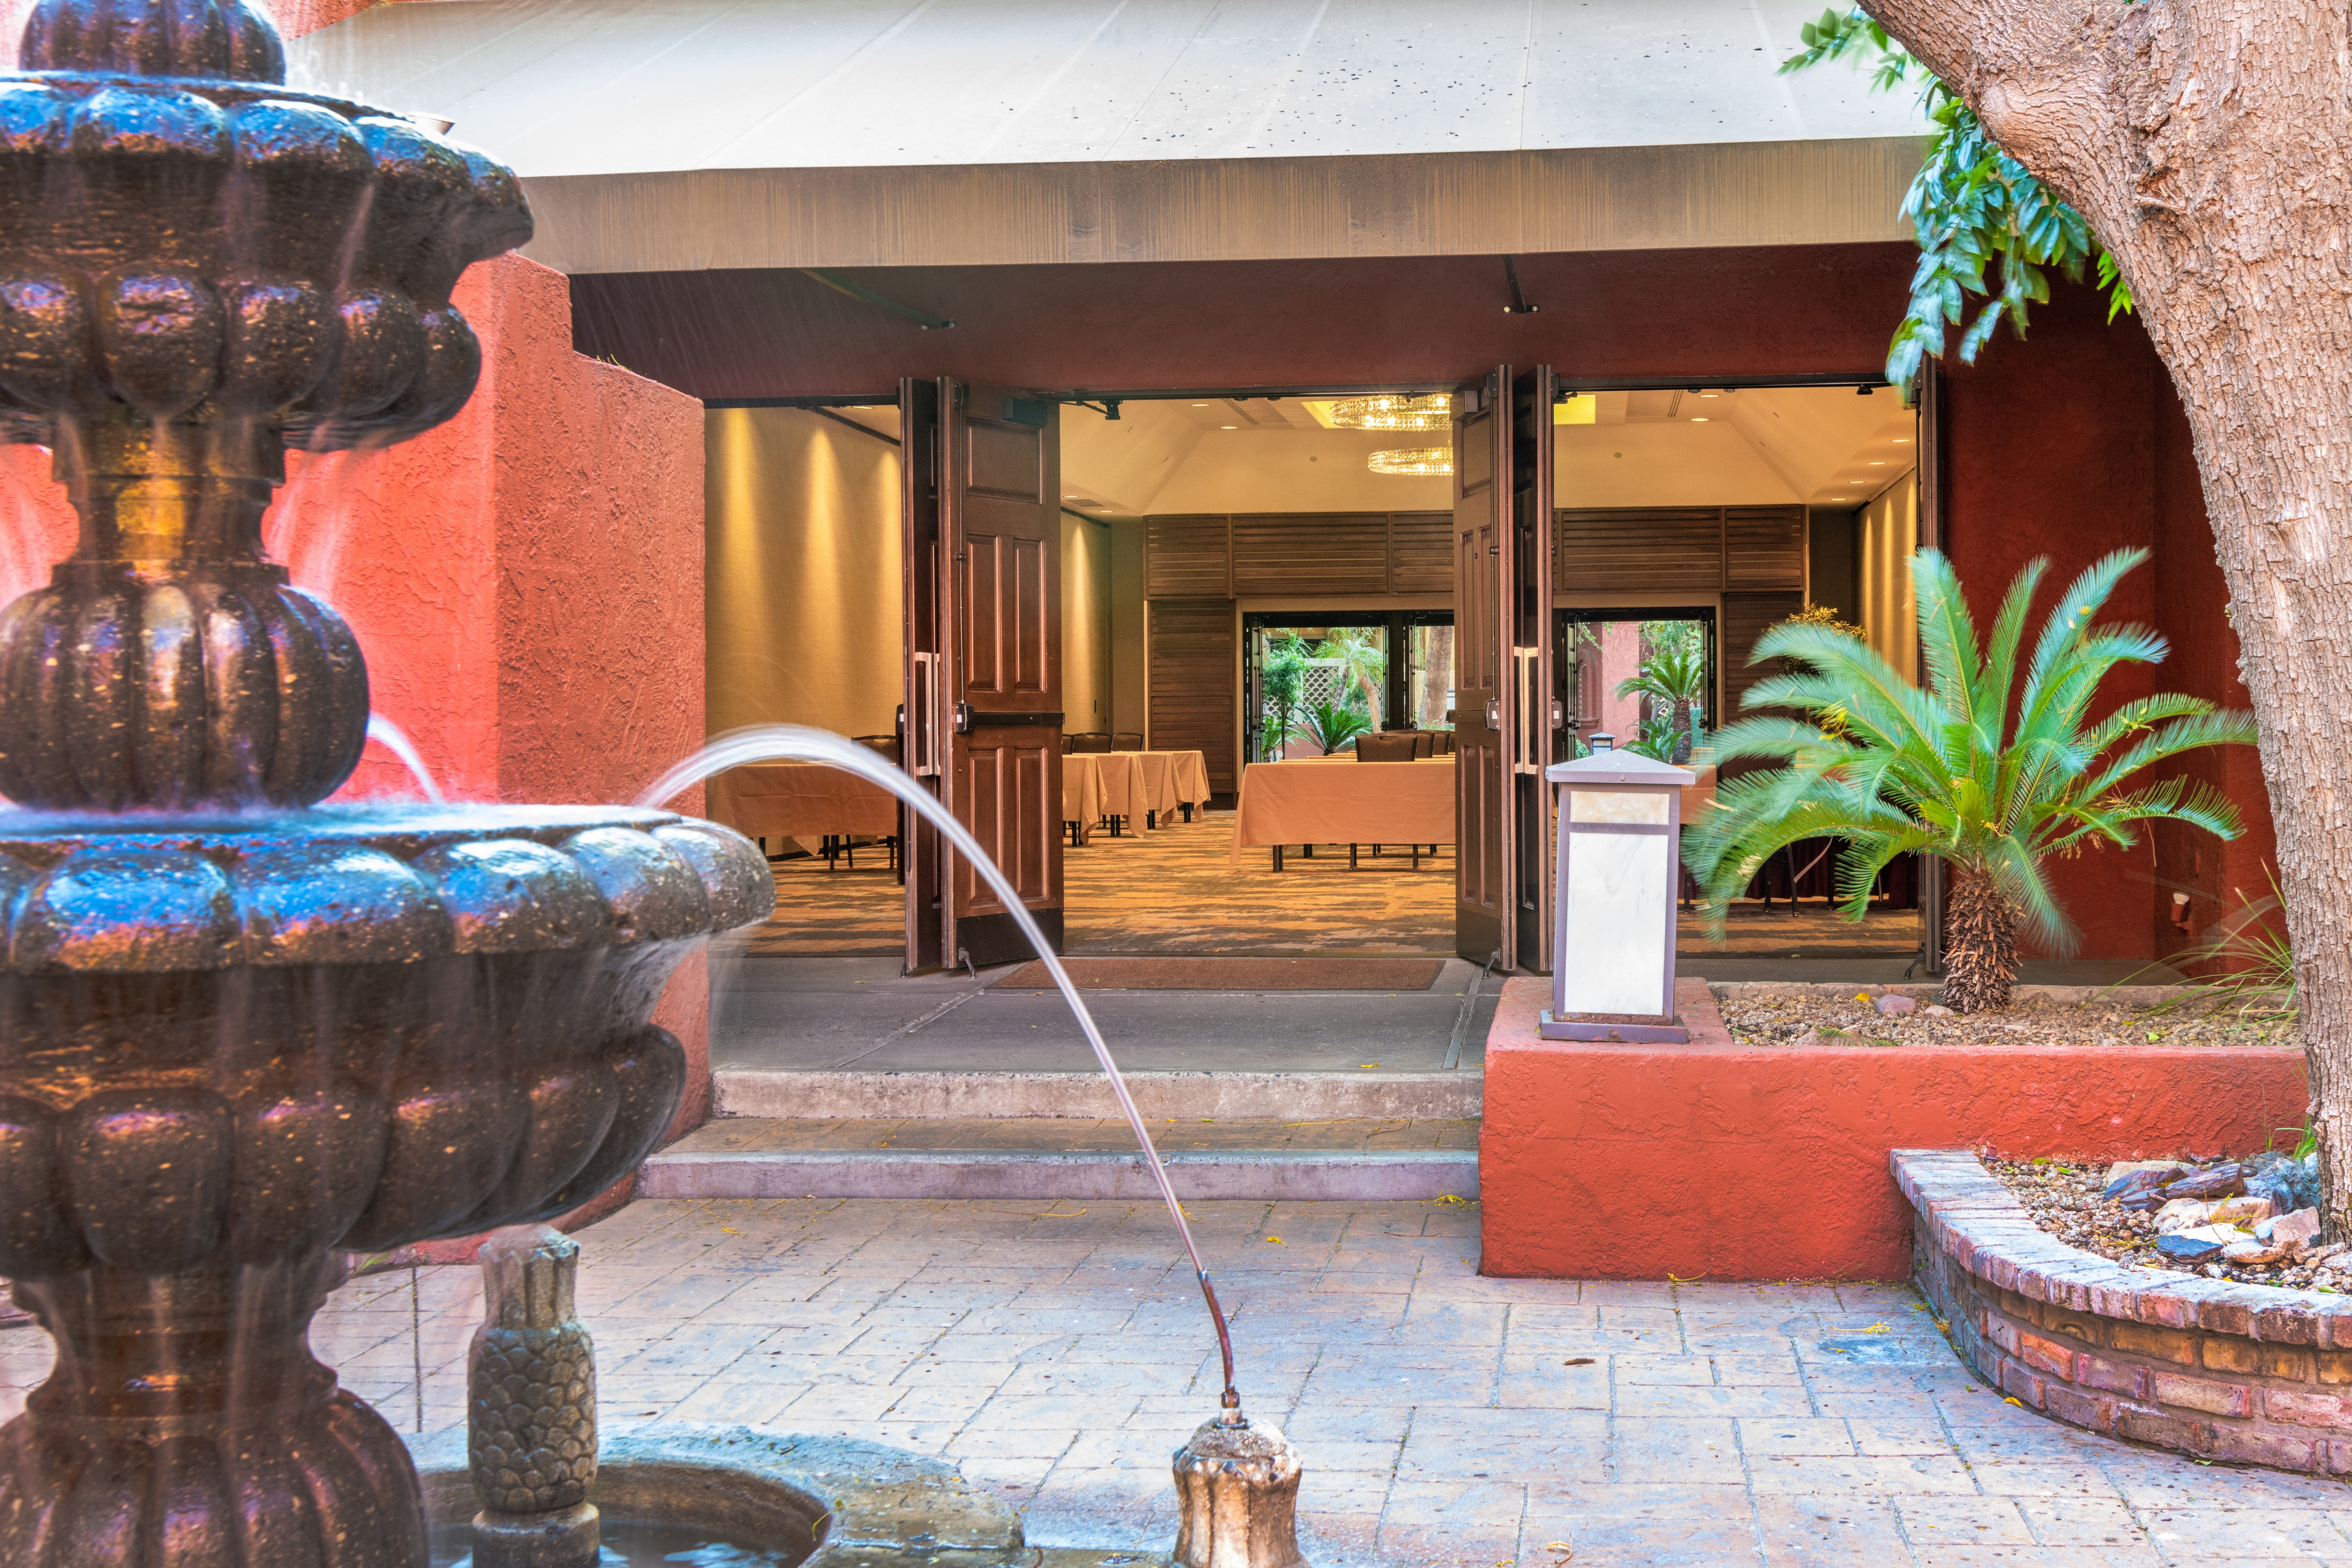 Hotel exterior with water feature